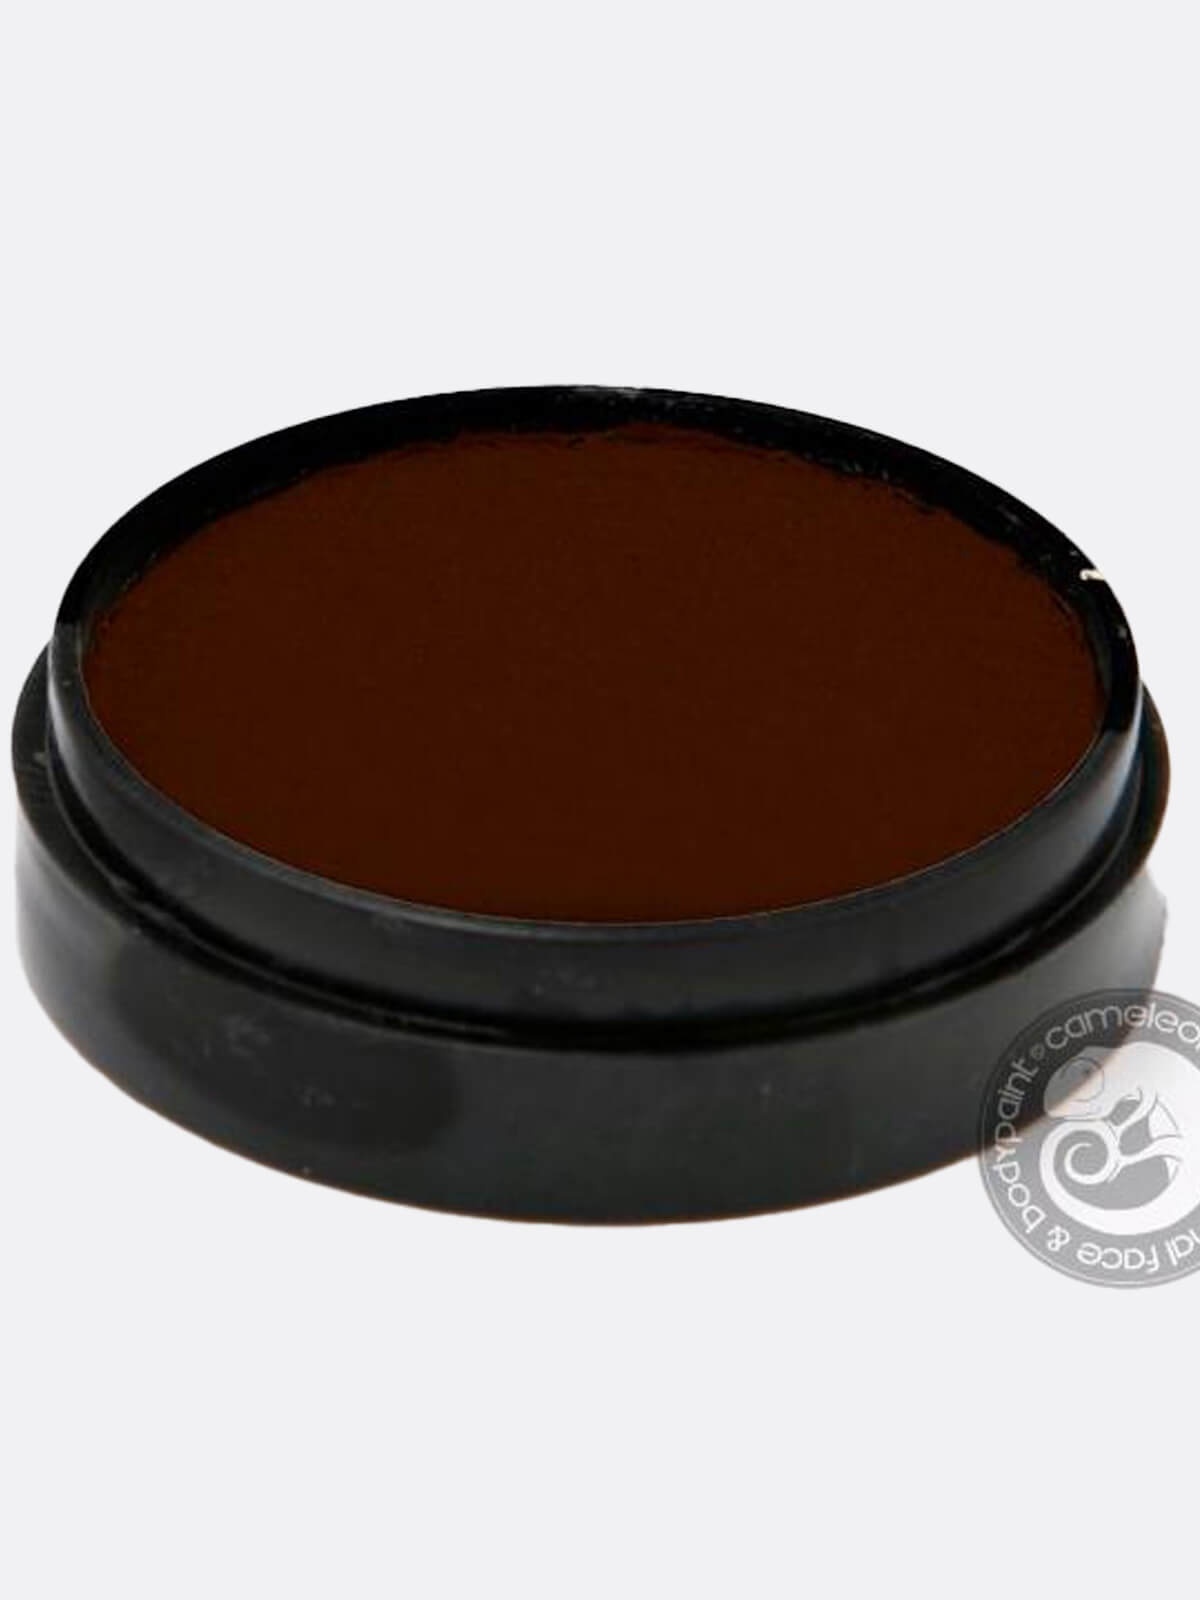 Espresso Face Paint by Cameleon